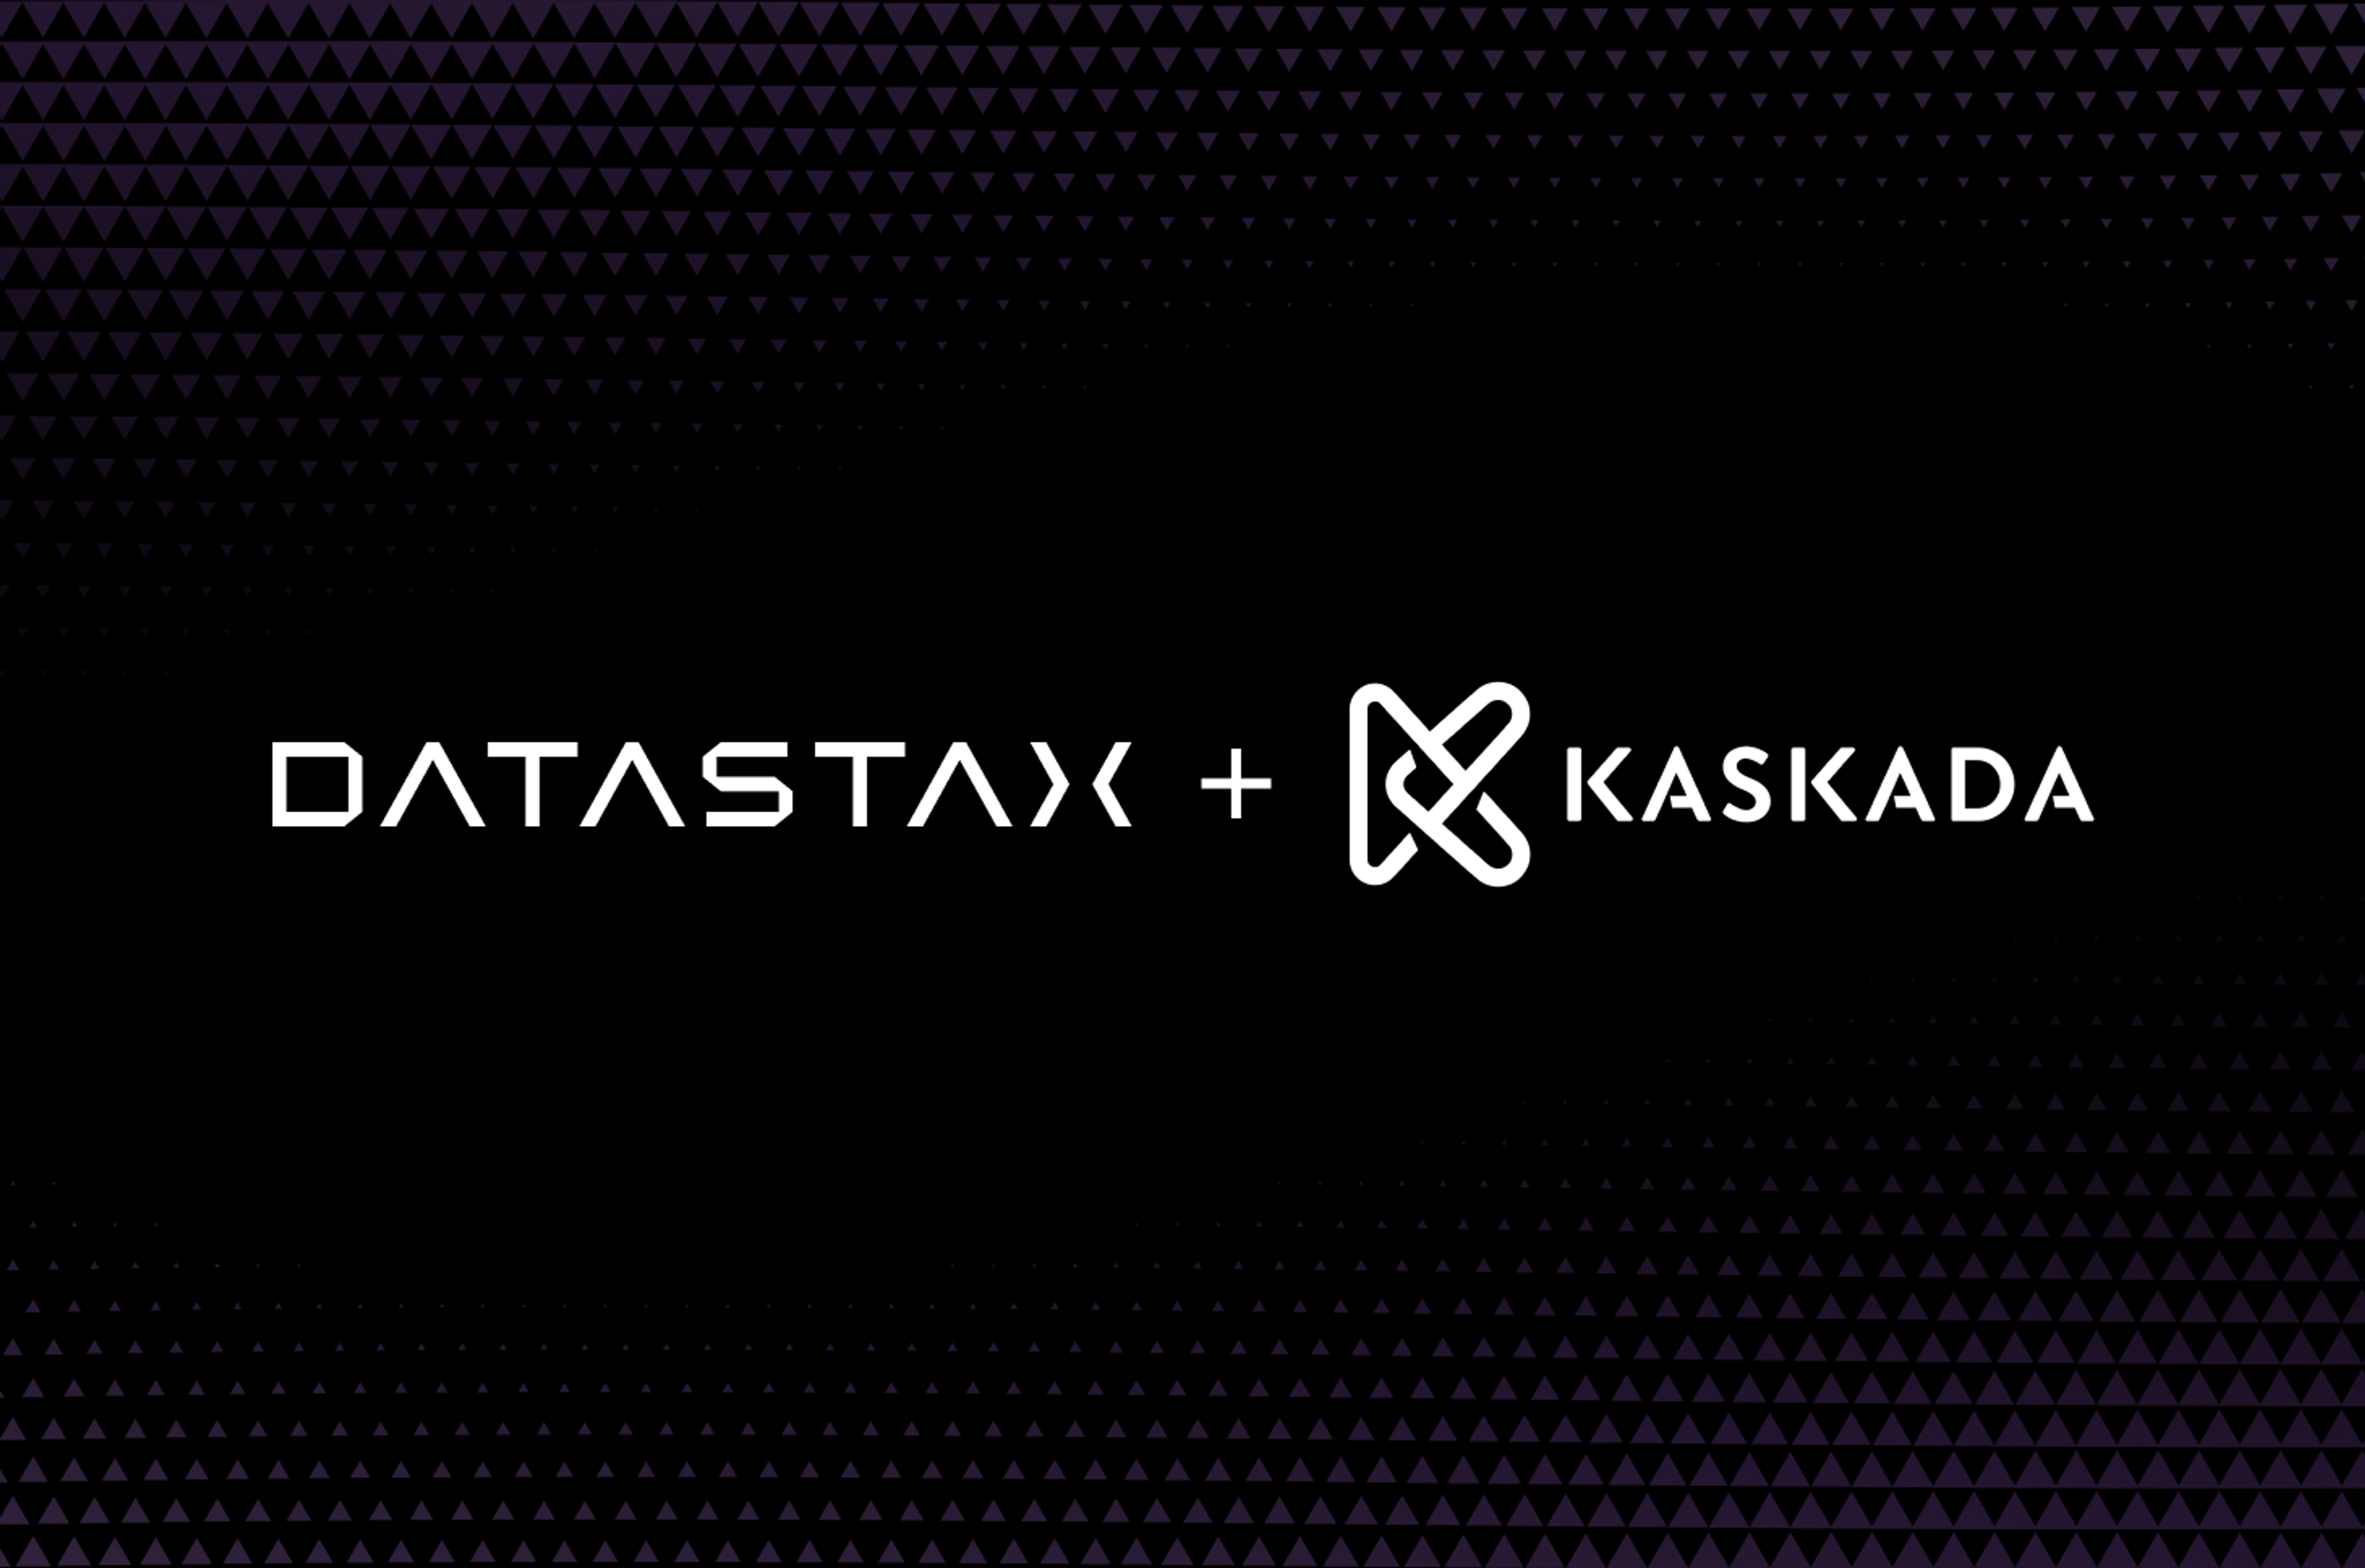 Kaskada Joins DataStax: Creating the World’s Best Real-time AI Experience Together